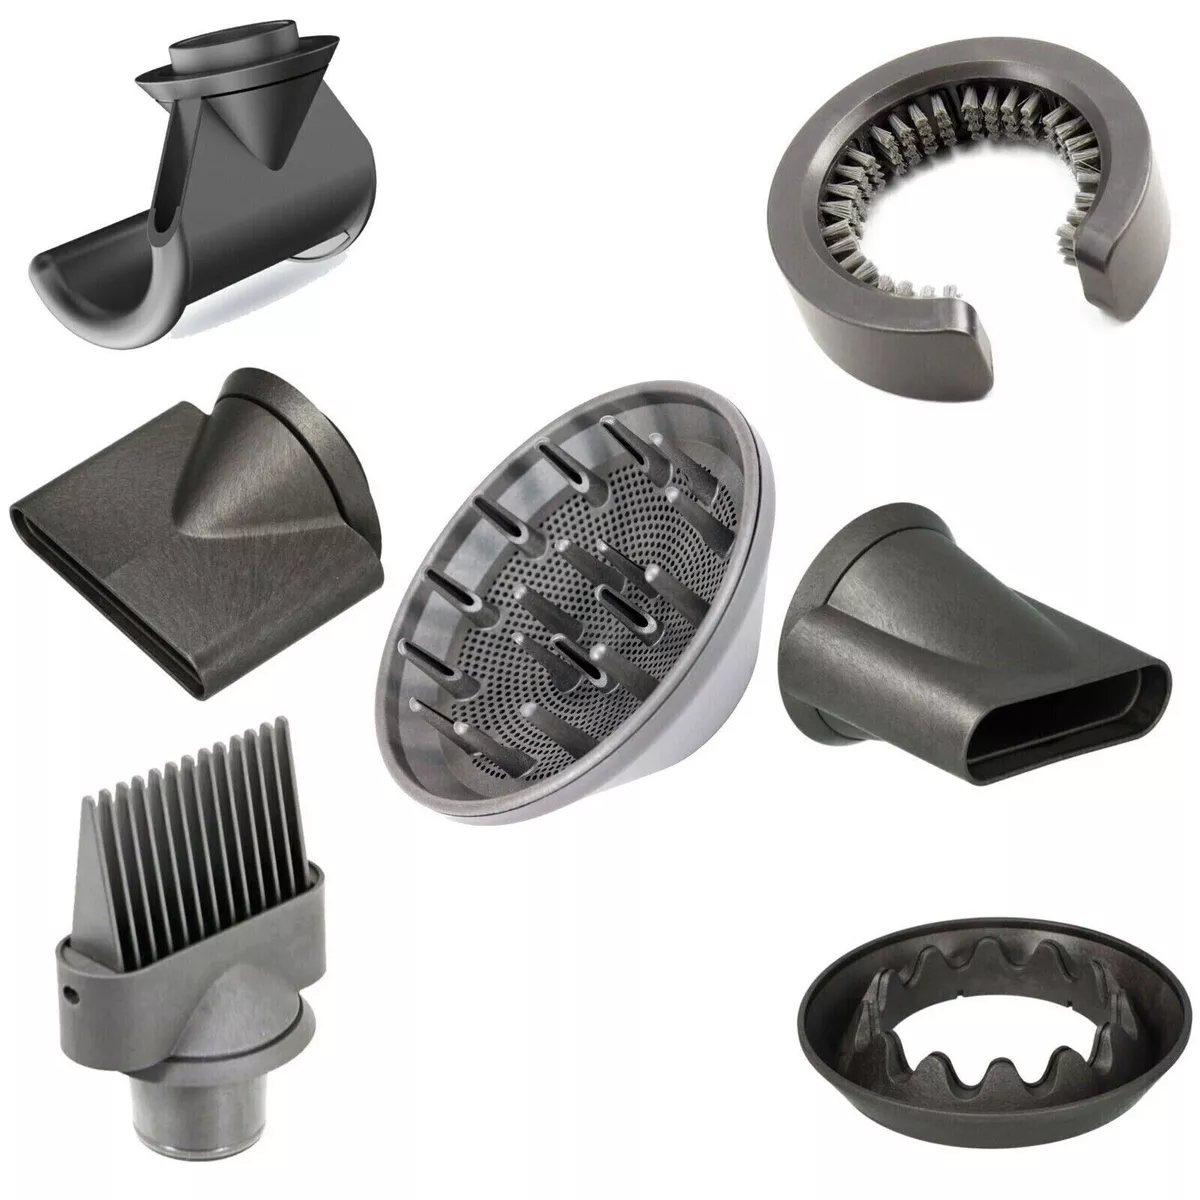 hair dryer attachments and accessories